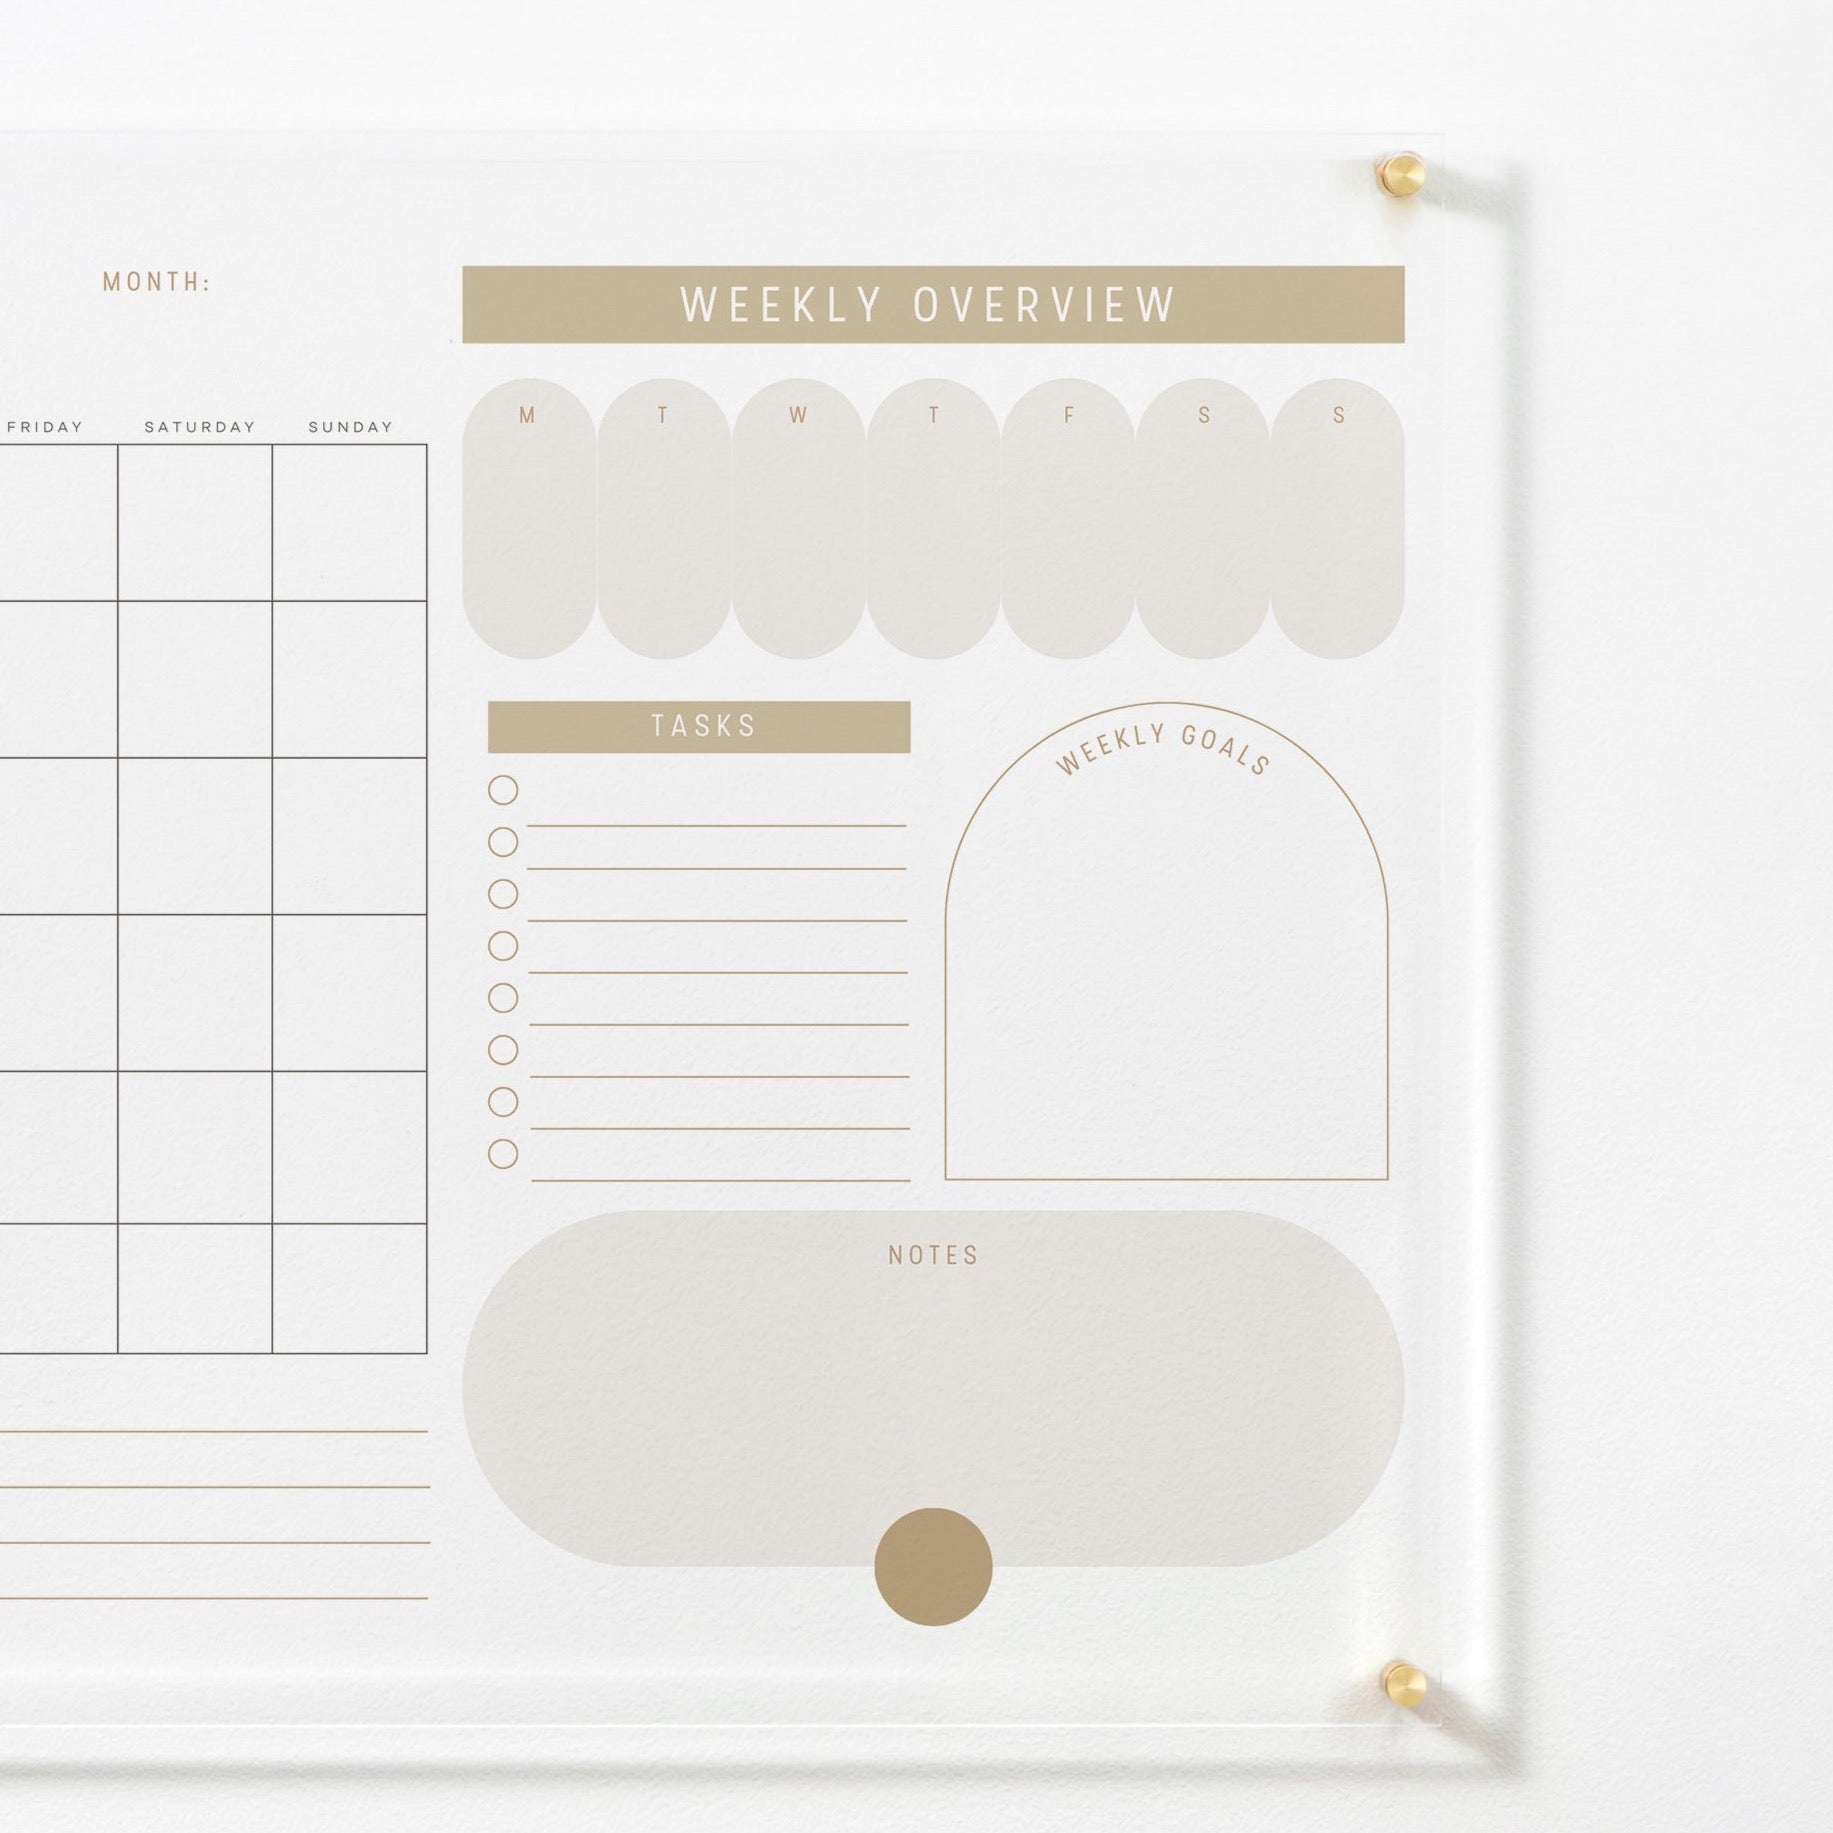 A close-up view of the "Custom Weekly Monthly Calendar - Whimsy" dry erase acrylic board showing the "Weekly Overview," "Tasks," "Weekly Goals," and "Notes" sections on the right side. The board is mounted on a wall with gold pins, highlighting the elegant design.